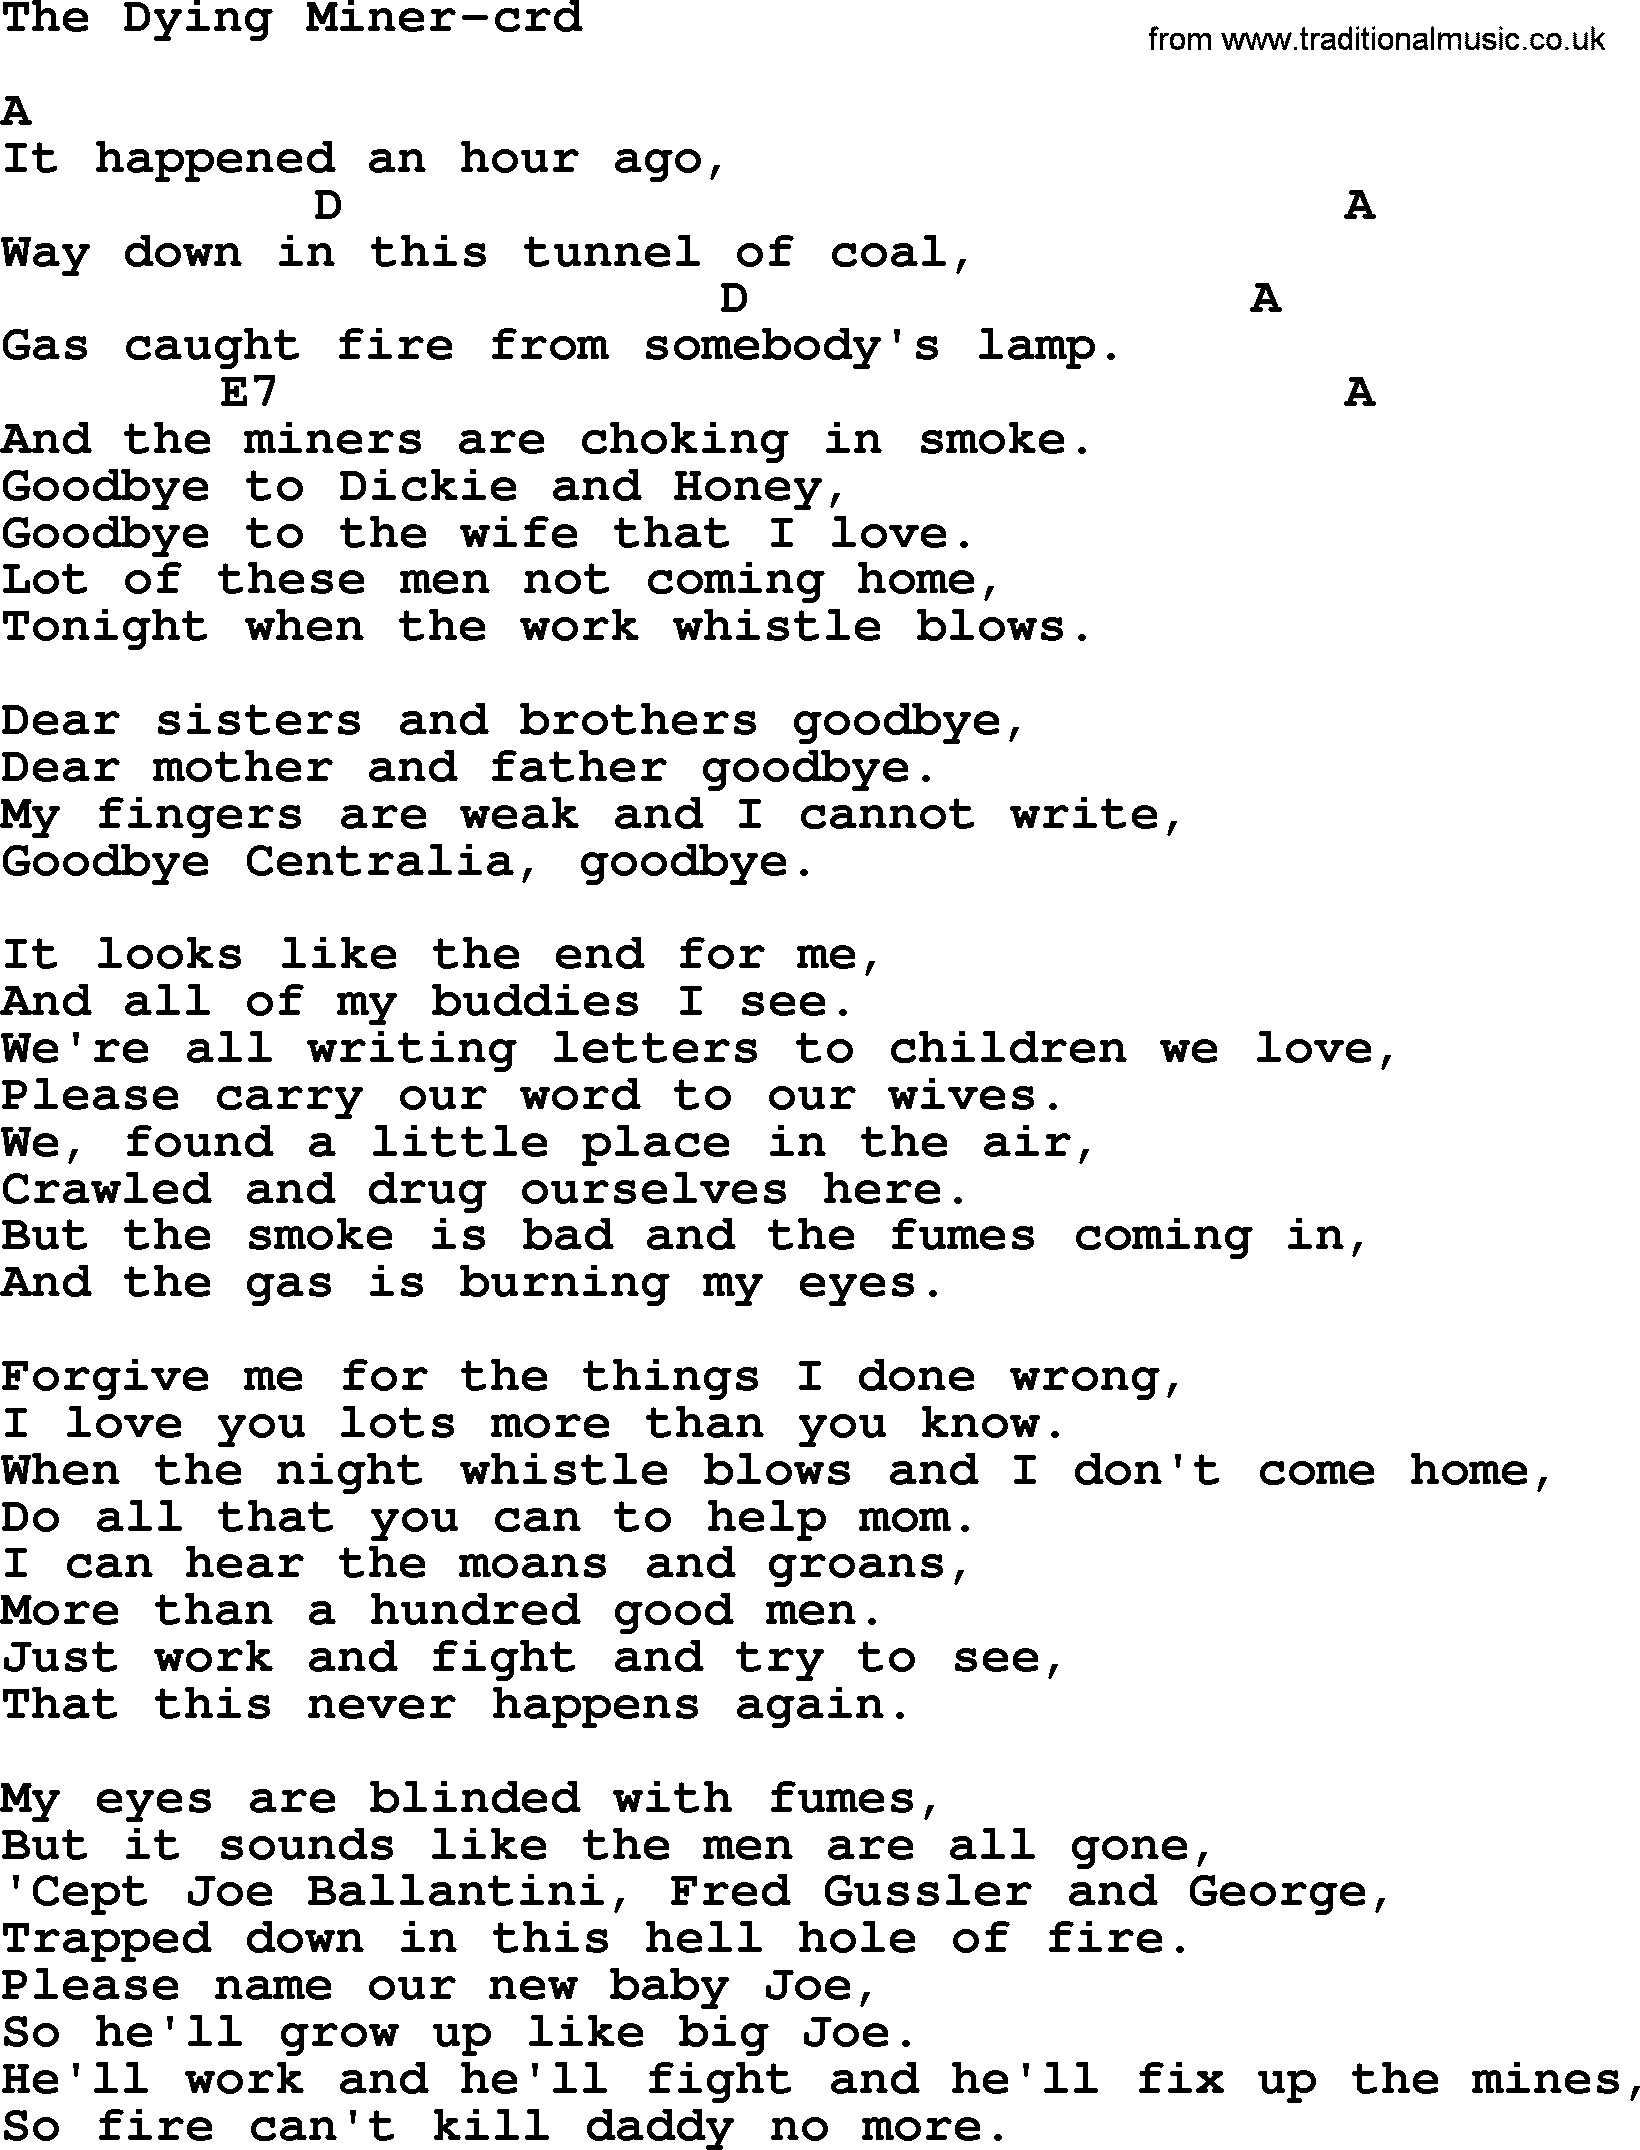 Woody Guthrie song The Dying Miner lyrics and chords